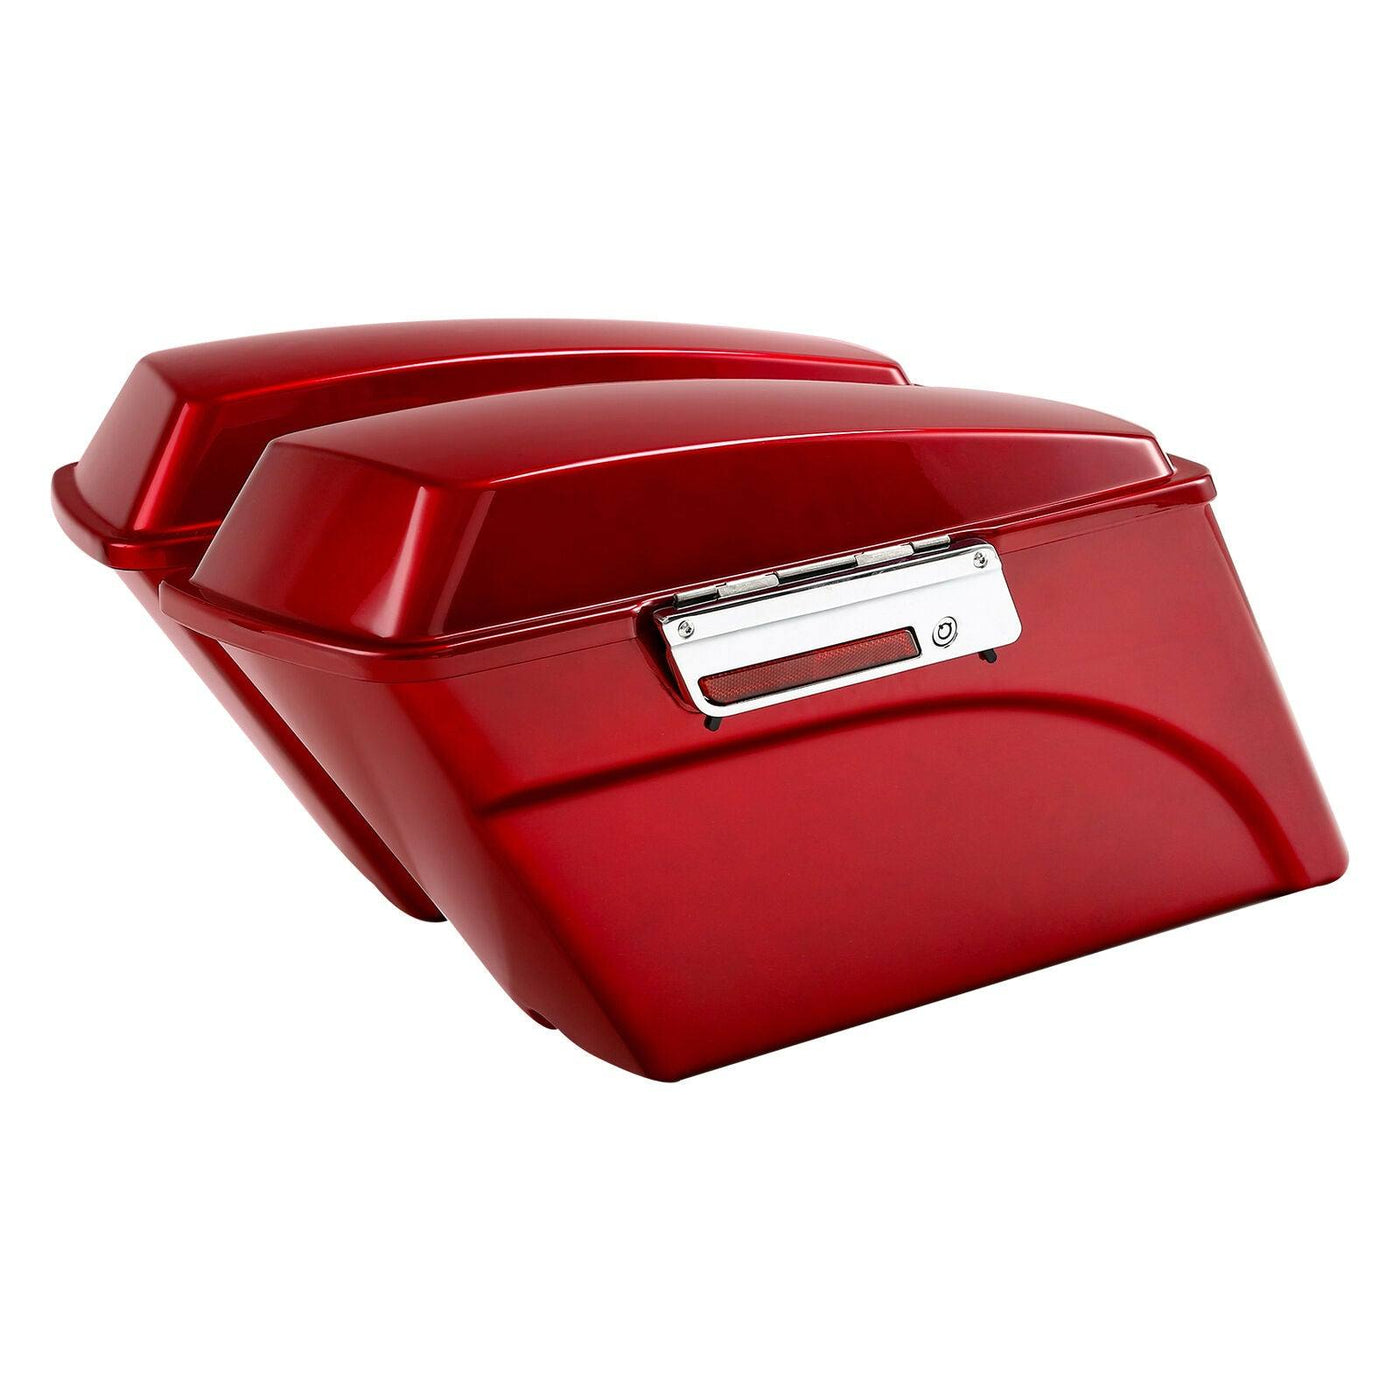 Red Saddlebags Fit For Harley Touring Electra Street Glide Road King 1994-2013 - Moto Life Products